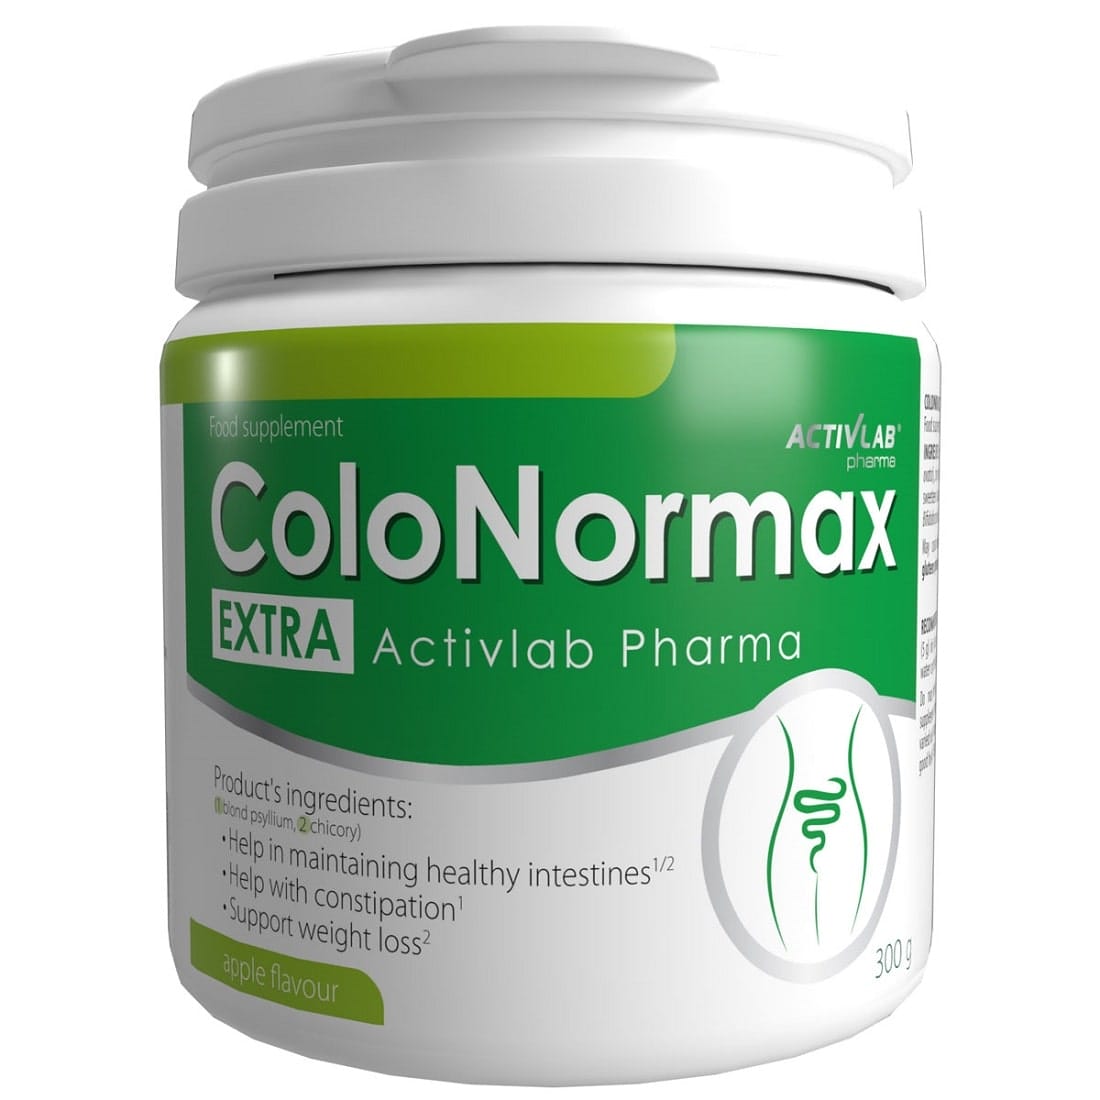 is a dietary supplement containing the seed husk of Plantago ovata, chicory inulin (Cichorium intybus) and probiotic bacteria of the Lactobacillus acidophilus and Bifidobacterium lactis genus.